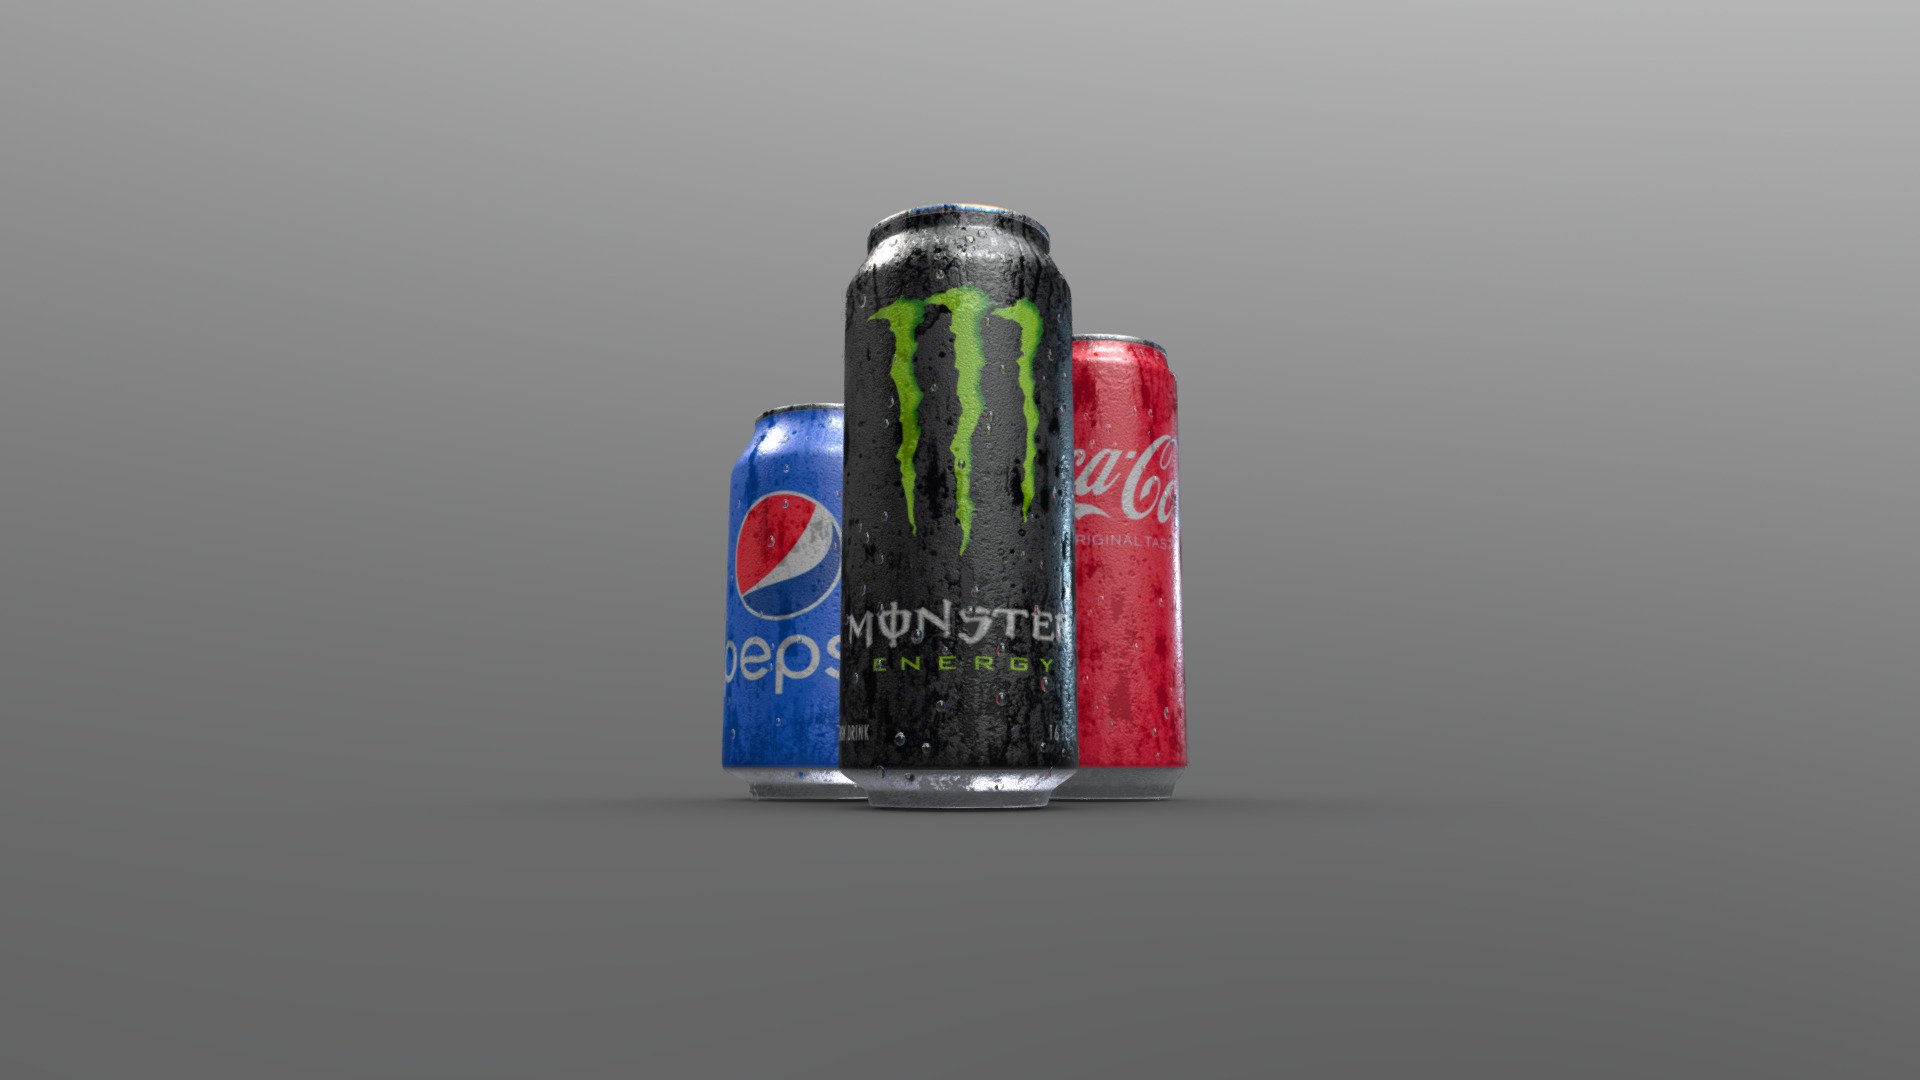 Soft Drink Aluminum Soda Cans with Water Condensation Textures and Droplets.

Cans included: Coca-Cola (330 ml.), Monster Energy (16 fl. oz.), Pepsi (12 fl. oz.)







The cans are openable, but saved closed in all the files.

8K true to life color textures. Replaceable in the Substance Painter file if you want to use your own designs.

No N-gons, Isolated Vertices, or Complex Poles.

[Additional File Includes]

_SPP - Substance Painter project file.

_TEX_8K - 8K textures.

_C4D_Octane - Cinema 4D project file with Octane shaders.

_C4D - Cinema 4D project file with Physical/Standard shaders.

_FBX - Autodesk FBX.

_OBJ - OBJ/MTL. Subdiv Lv. 0 / 1 / 2.

_E3D - Element 3D.

_MAX - 3ds Max project file with default shaders.

Extra: .dae, .usdz, .gltf, .uasset 3d model